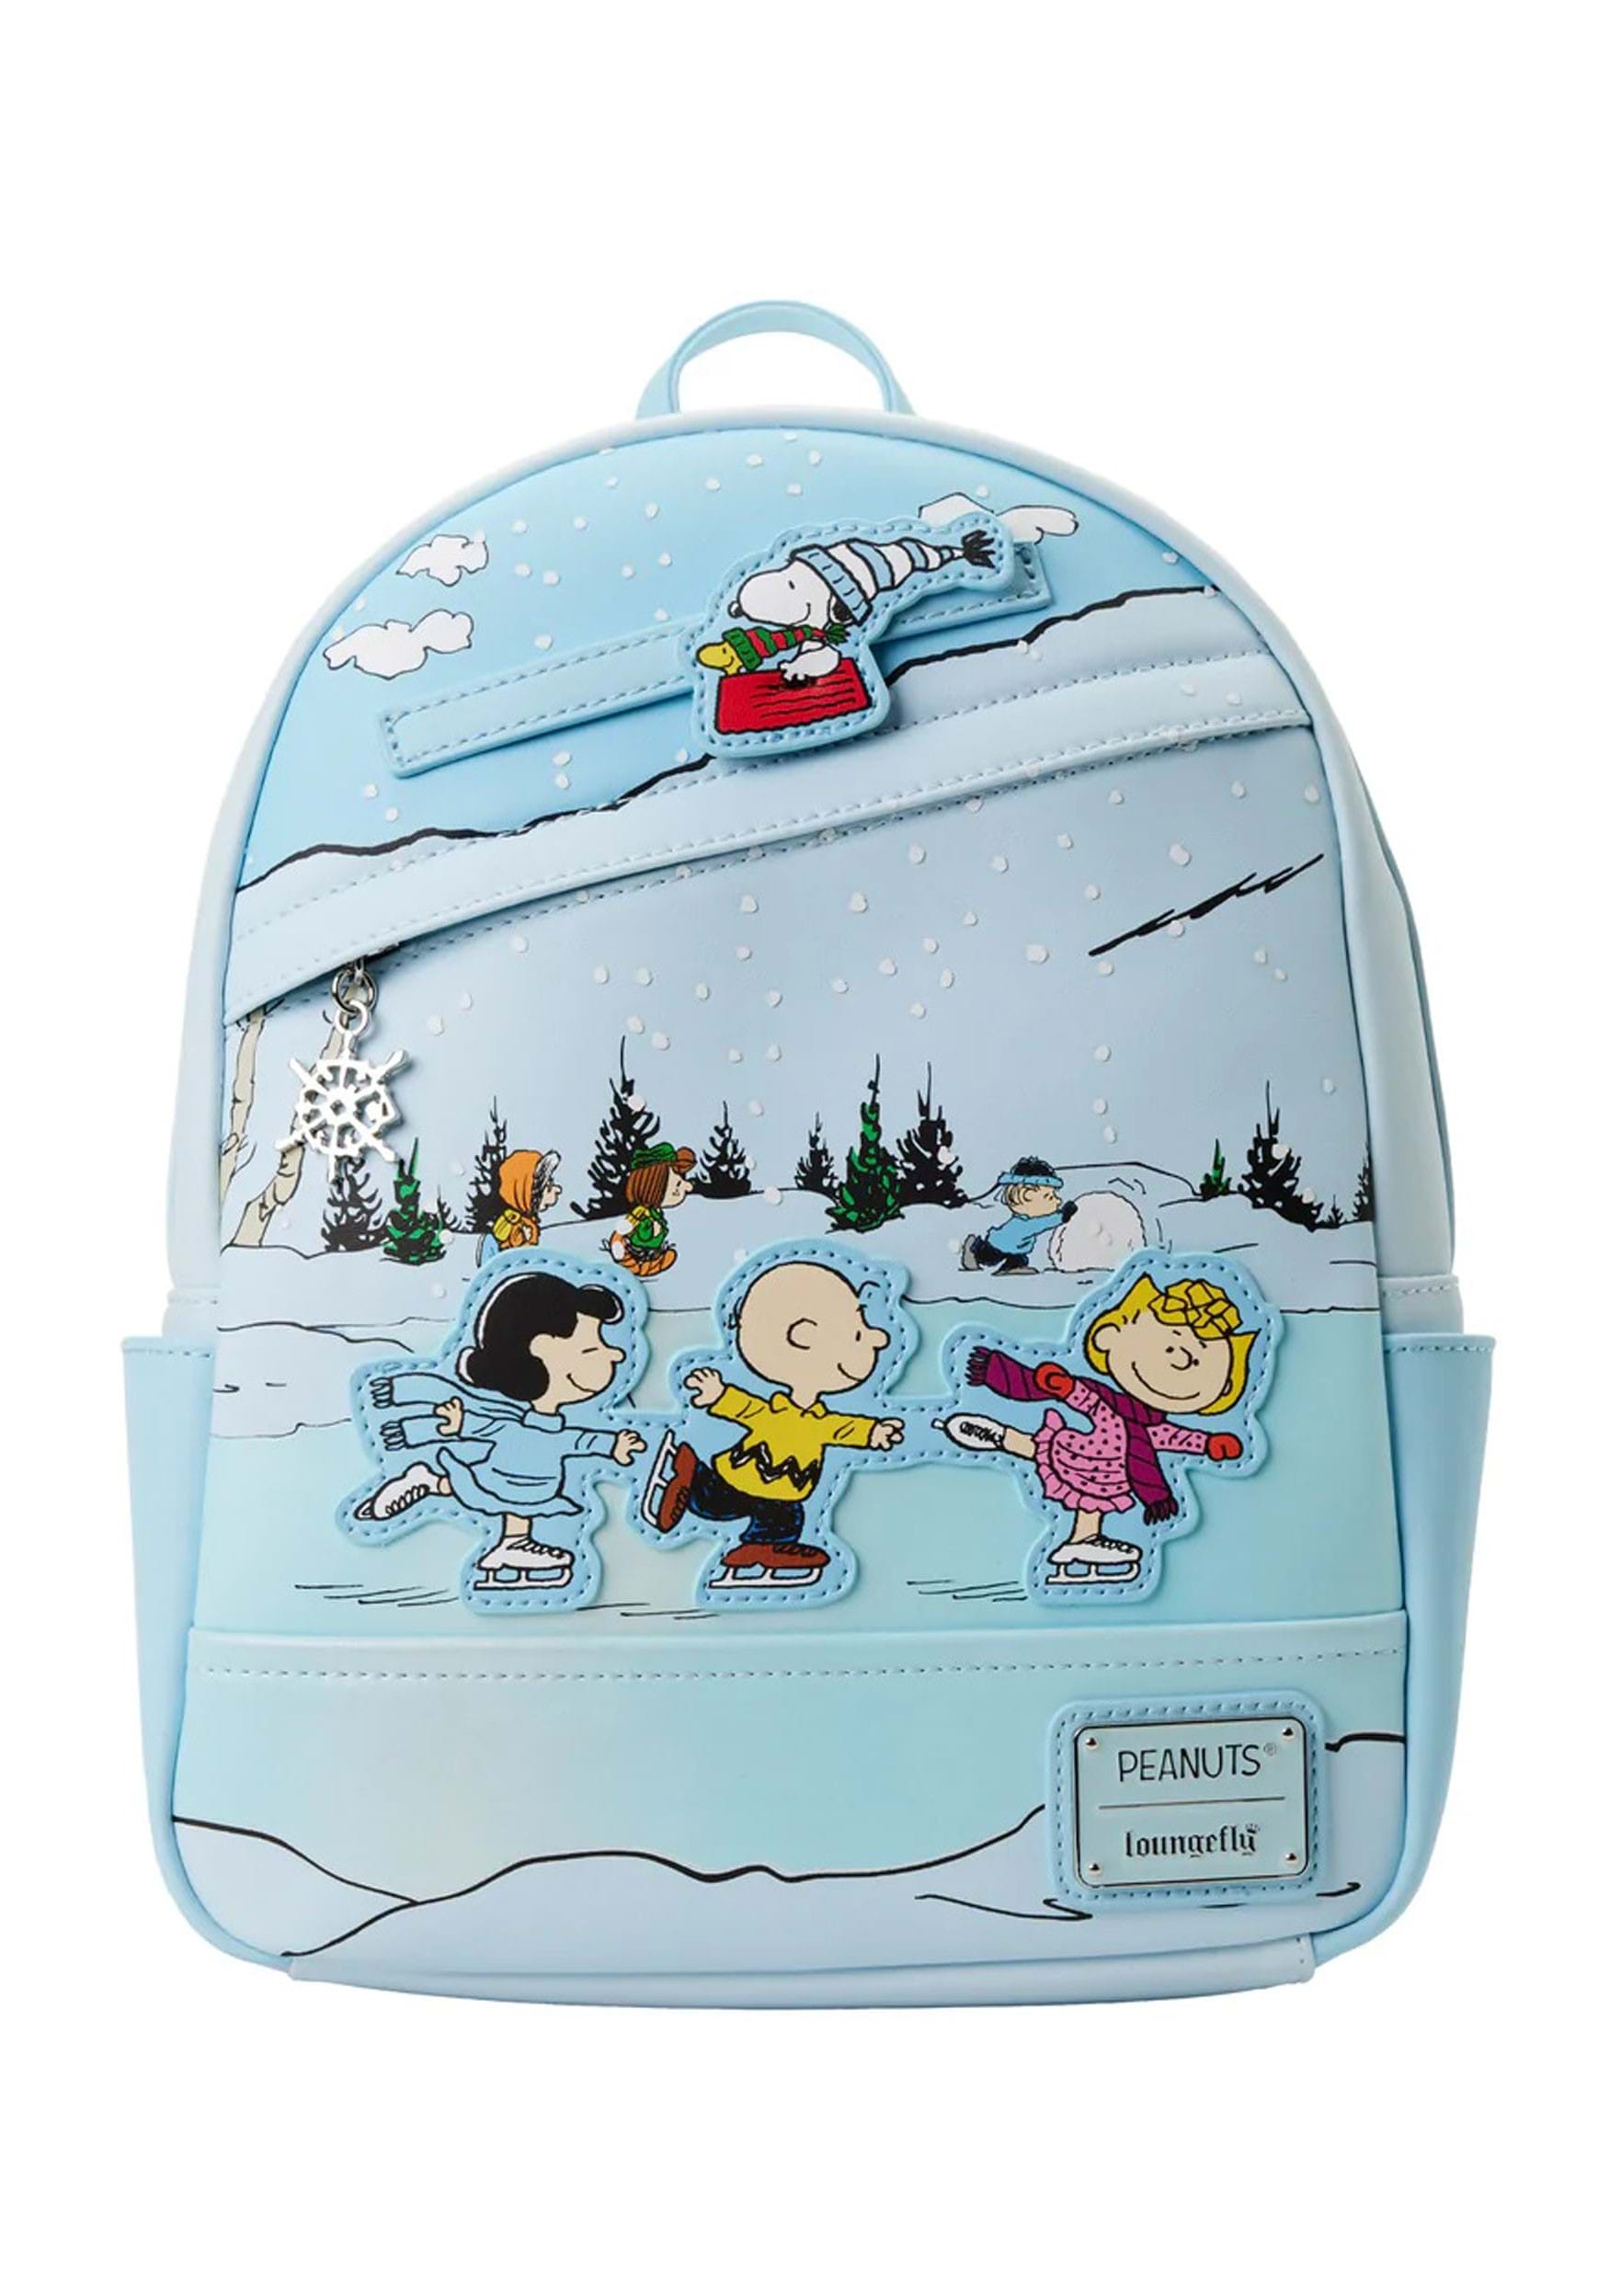 Peanuts Charlie Brown Ice Skating Mini Backpack by Loungefly